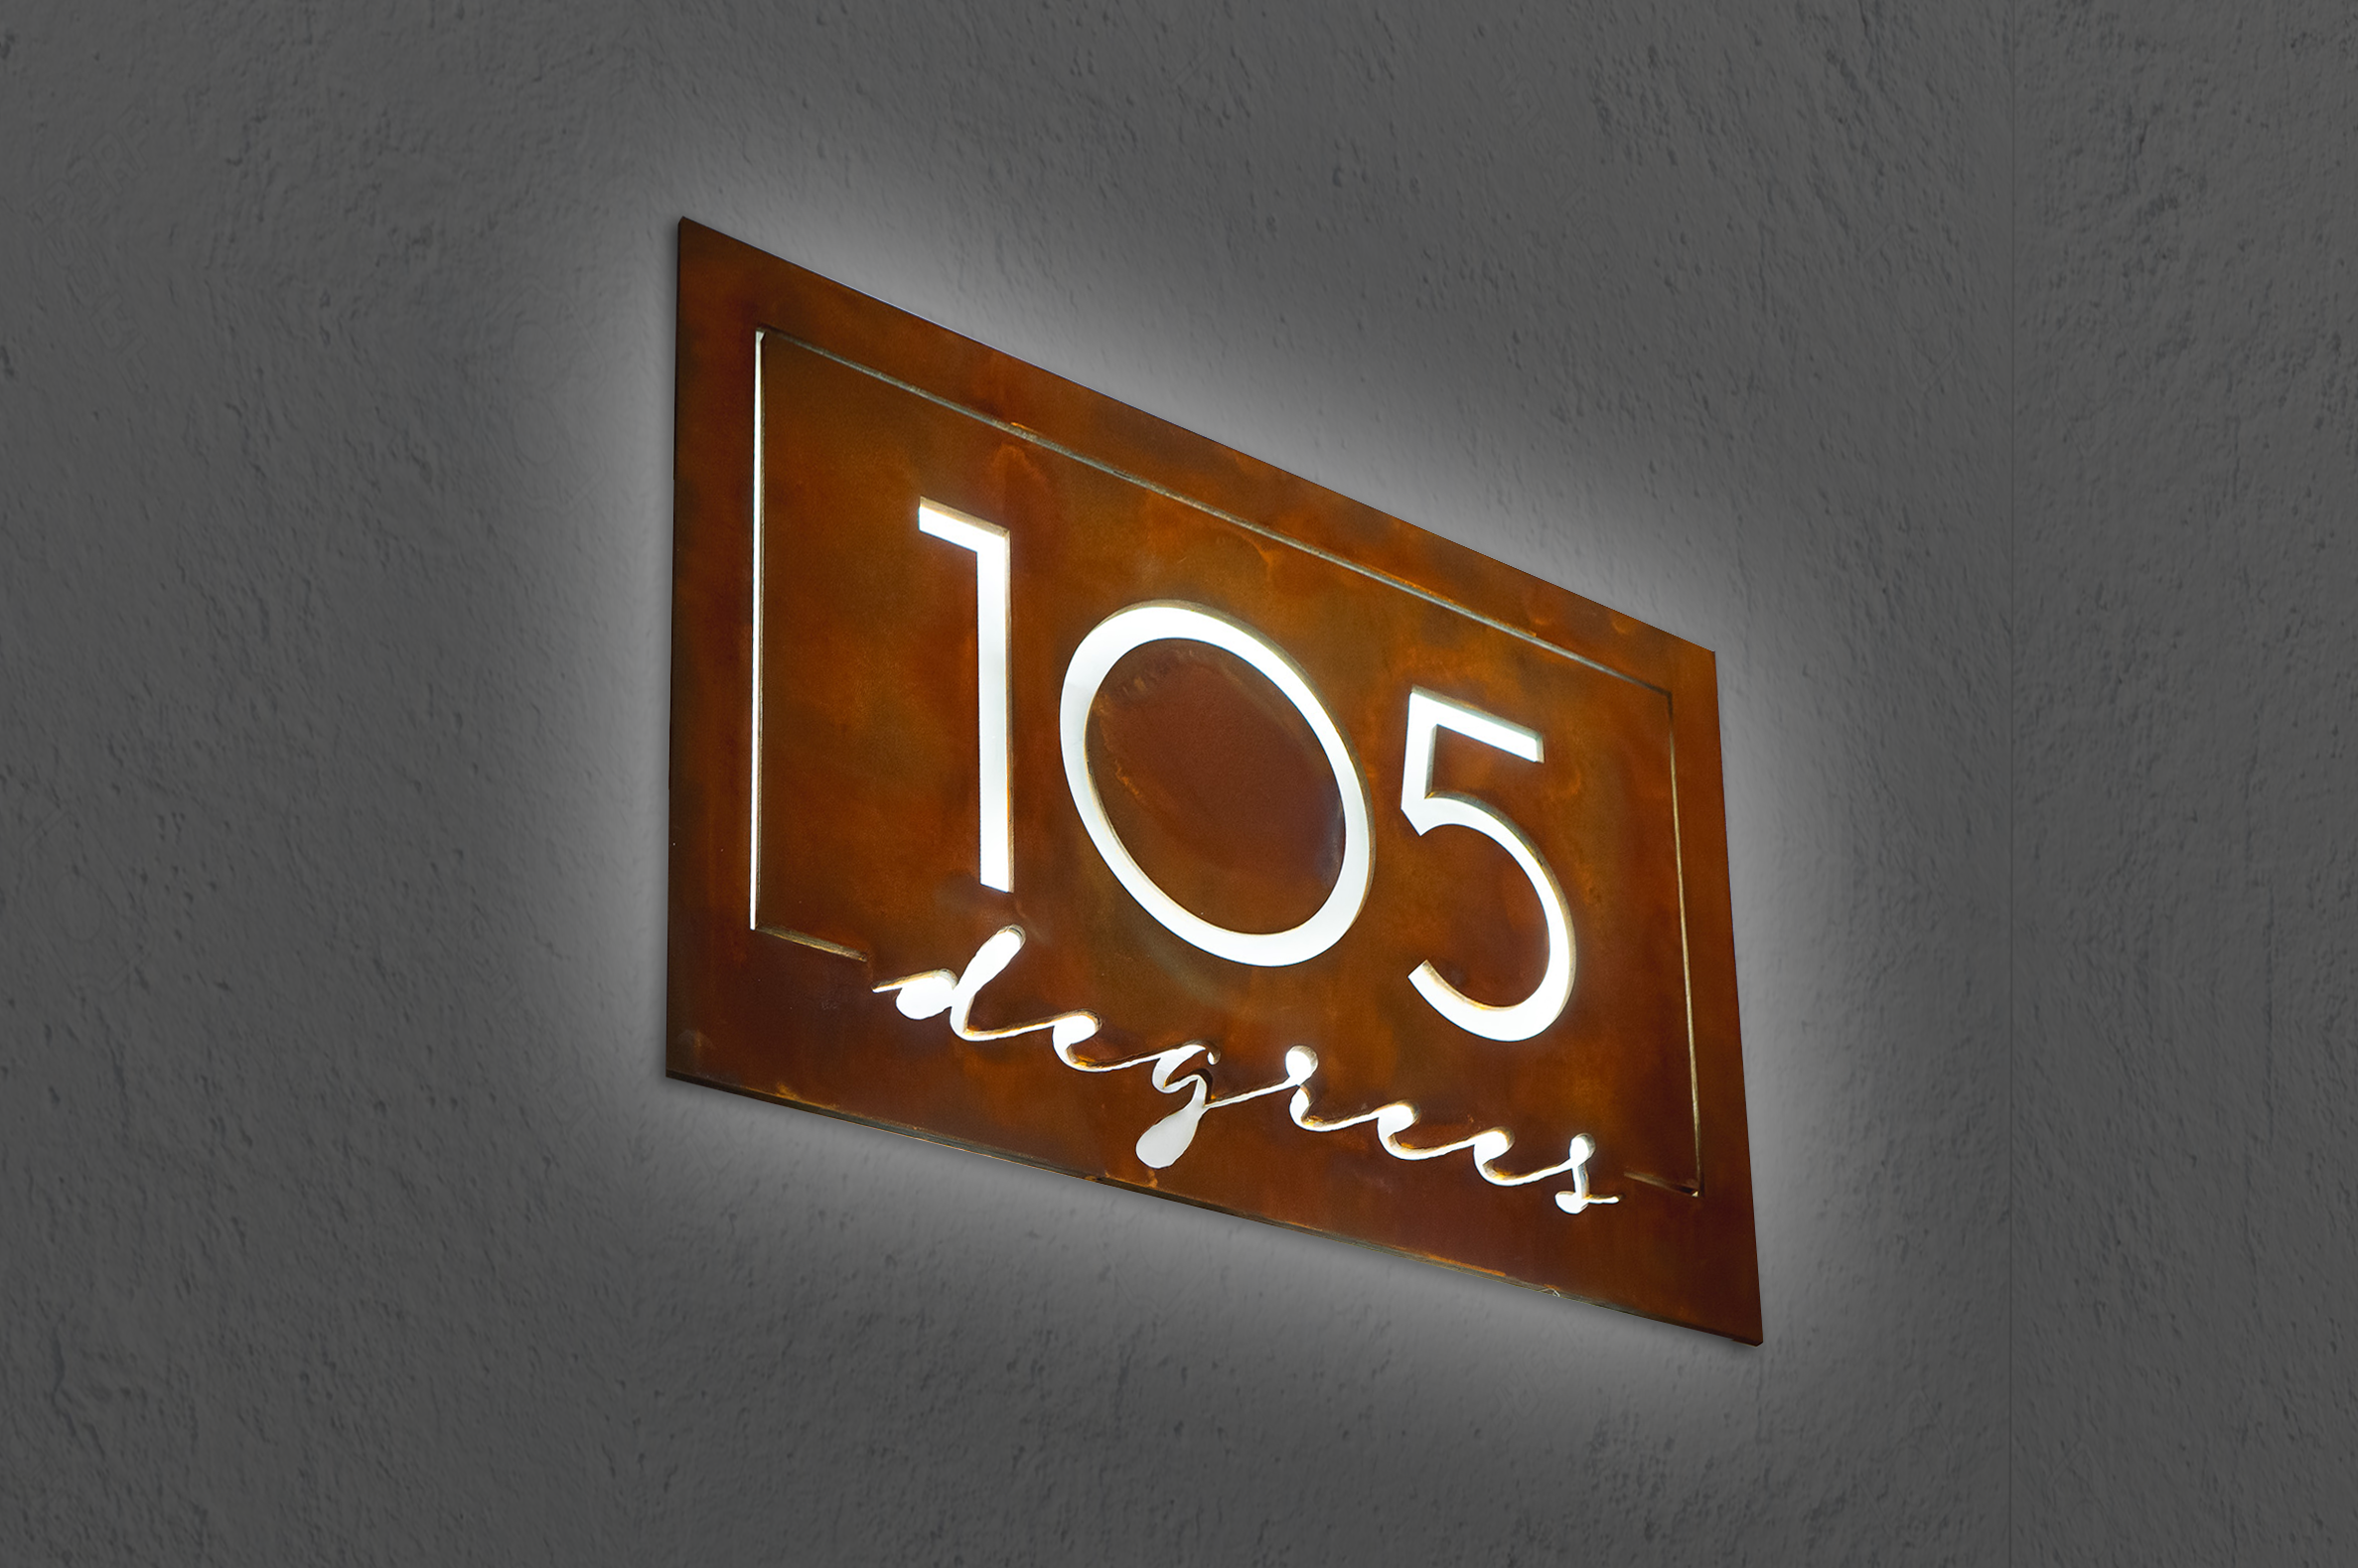 Rusted metal illuminated sign for 105 Degrees, a hot yoga studio at Newtown Athletic Club, a premiere family fitness and wellness center serving residents of Newtown, PA